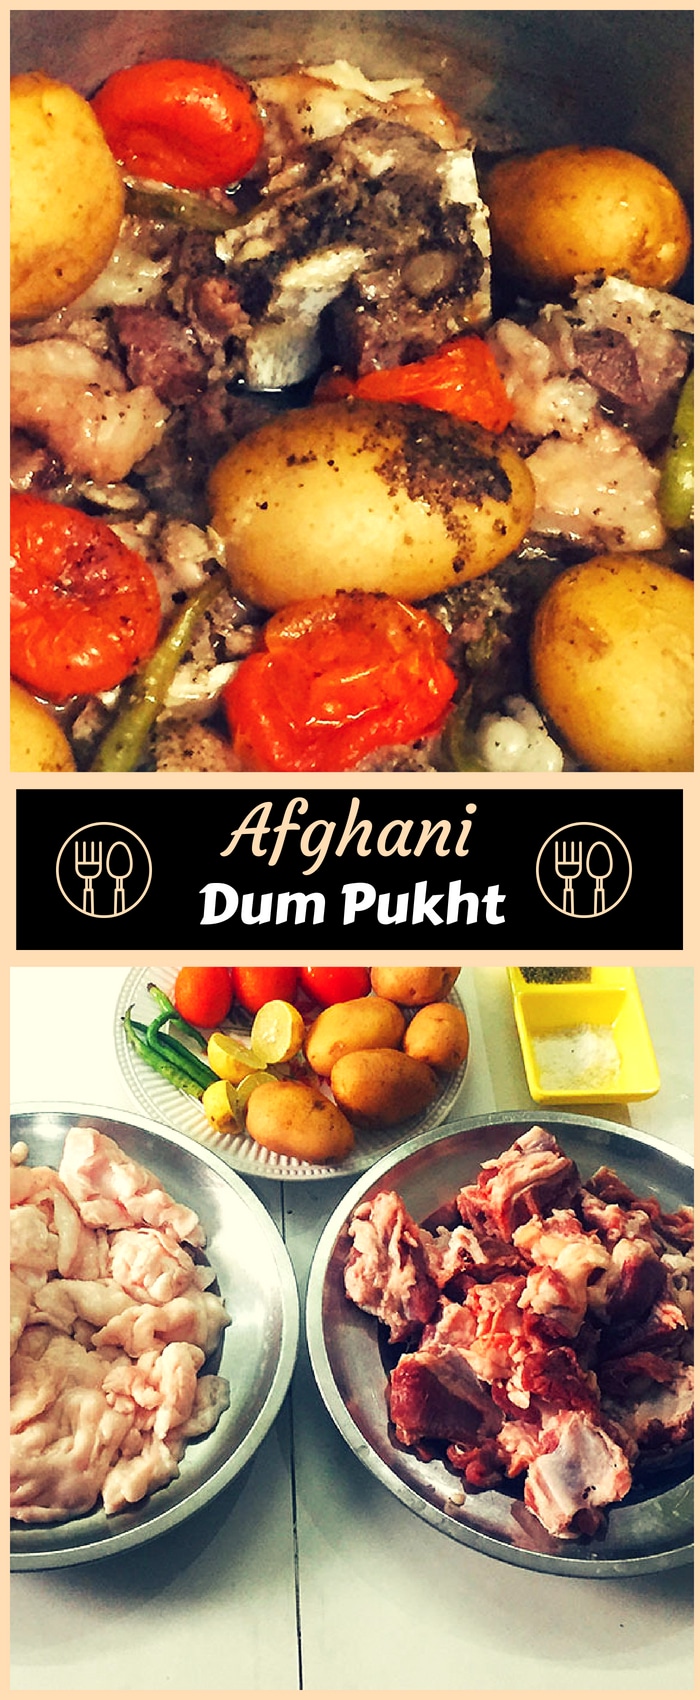 Afghani Dum Pukht - Slow Cooked Afghani Mutton Recipe | Tasted Recipes